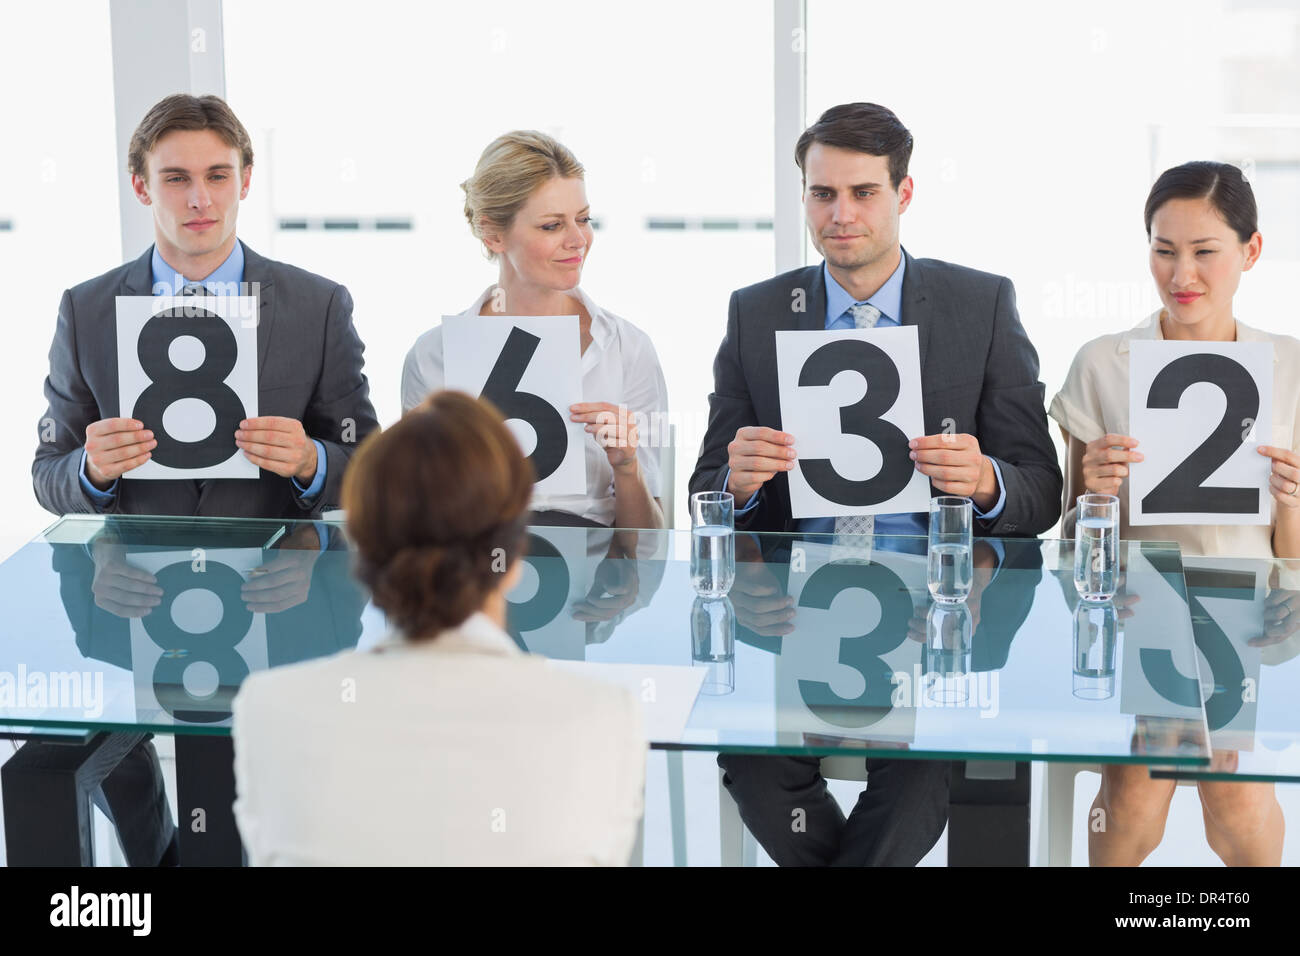 Judges in a row holding score signs Stock Photo